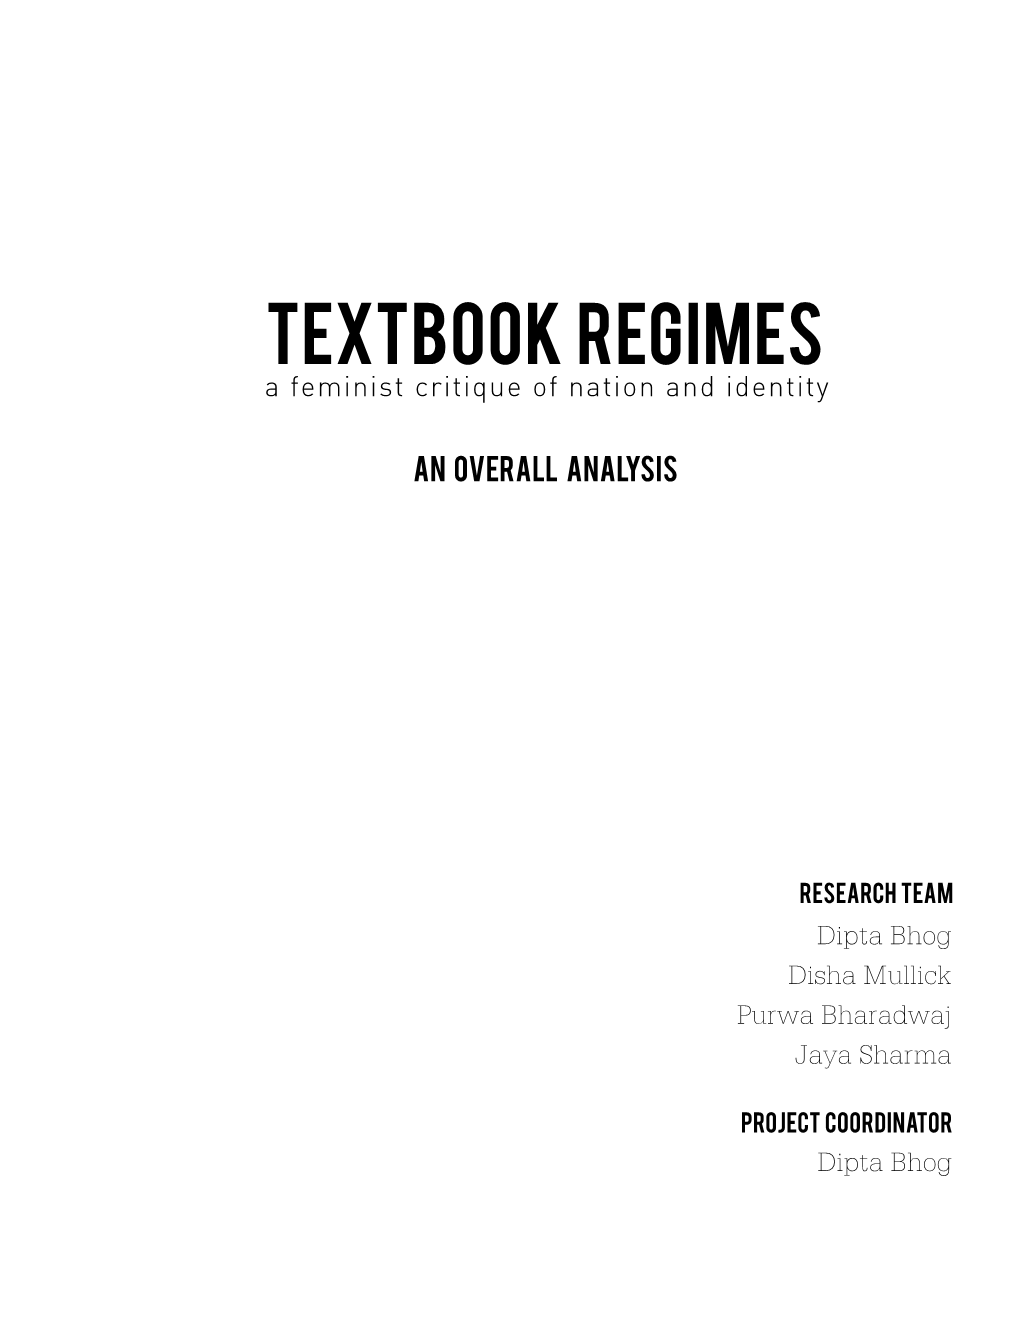 1. Textbook Regimes: Overall Analysis